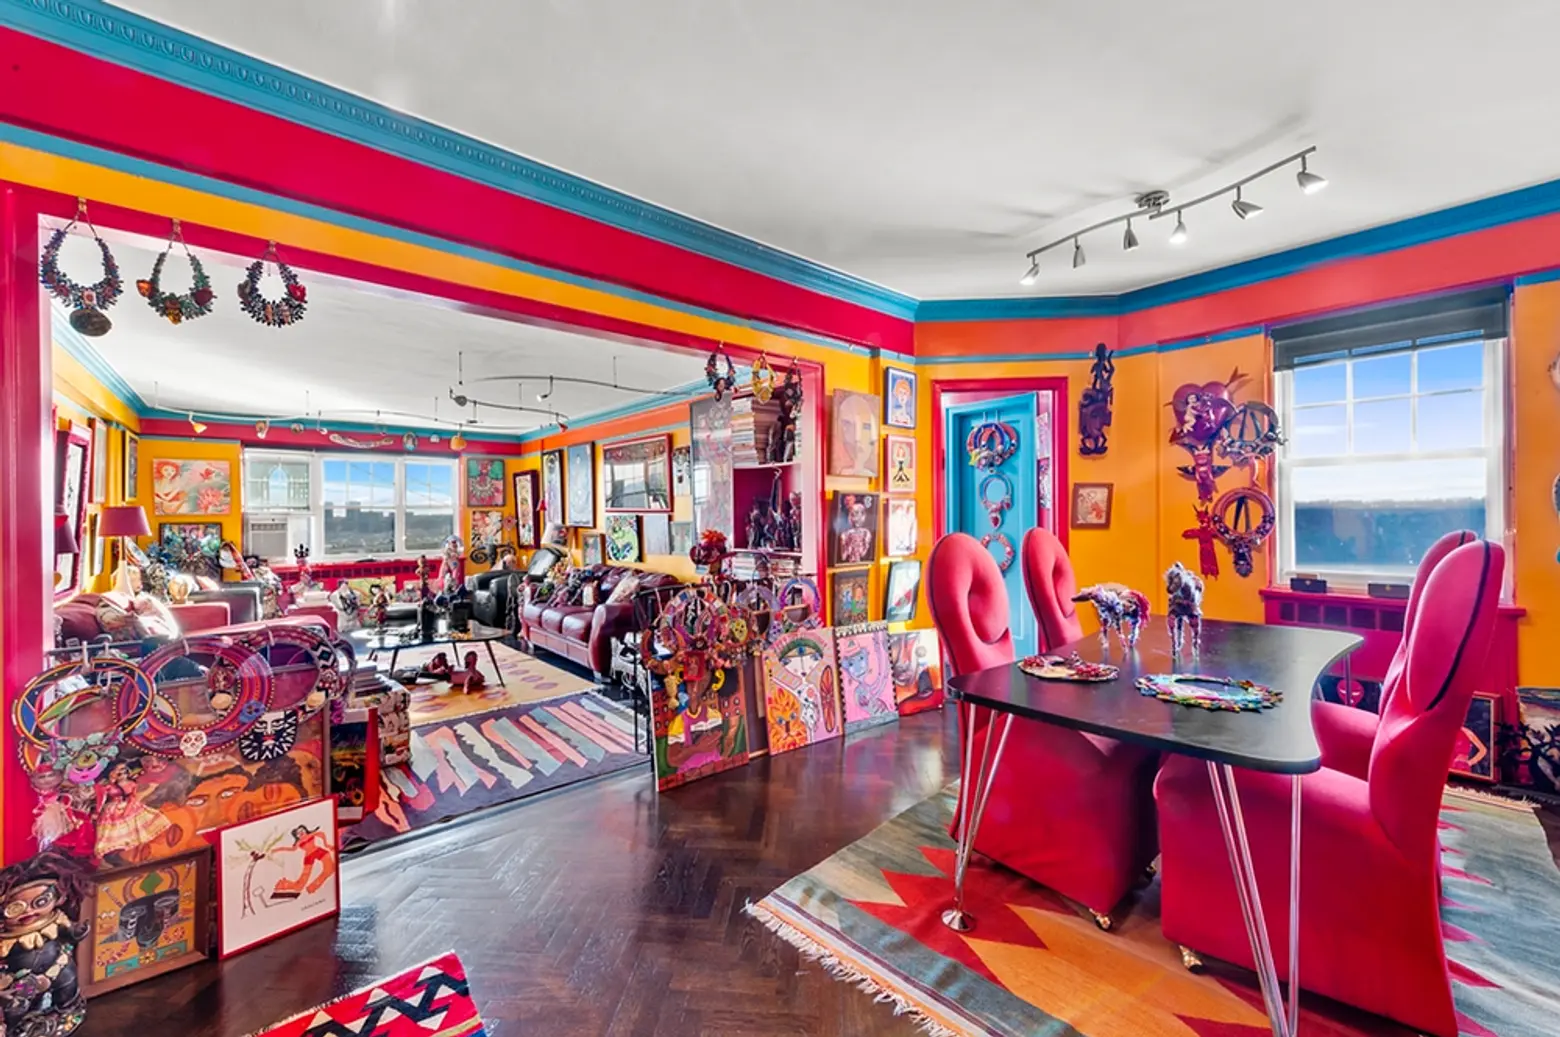 Asking $1.4M, this renovated Castle Village co-op is a candy-colored uptown oasis